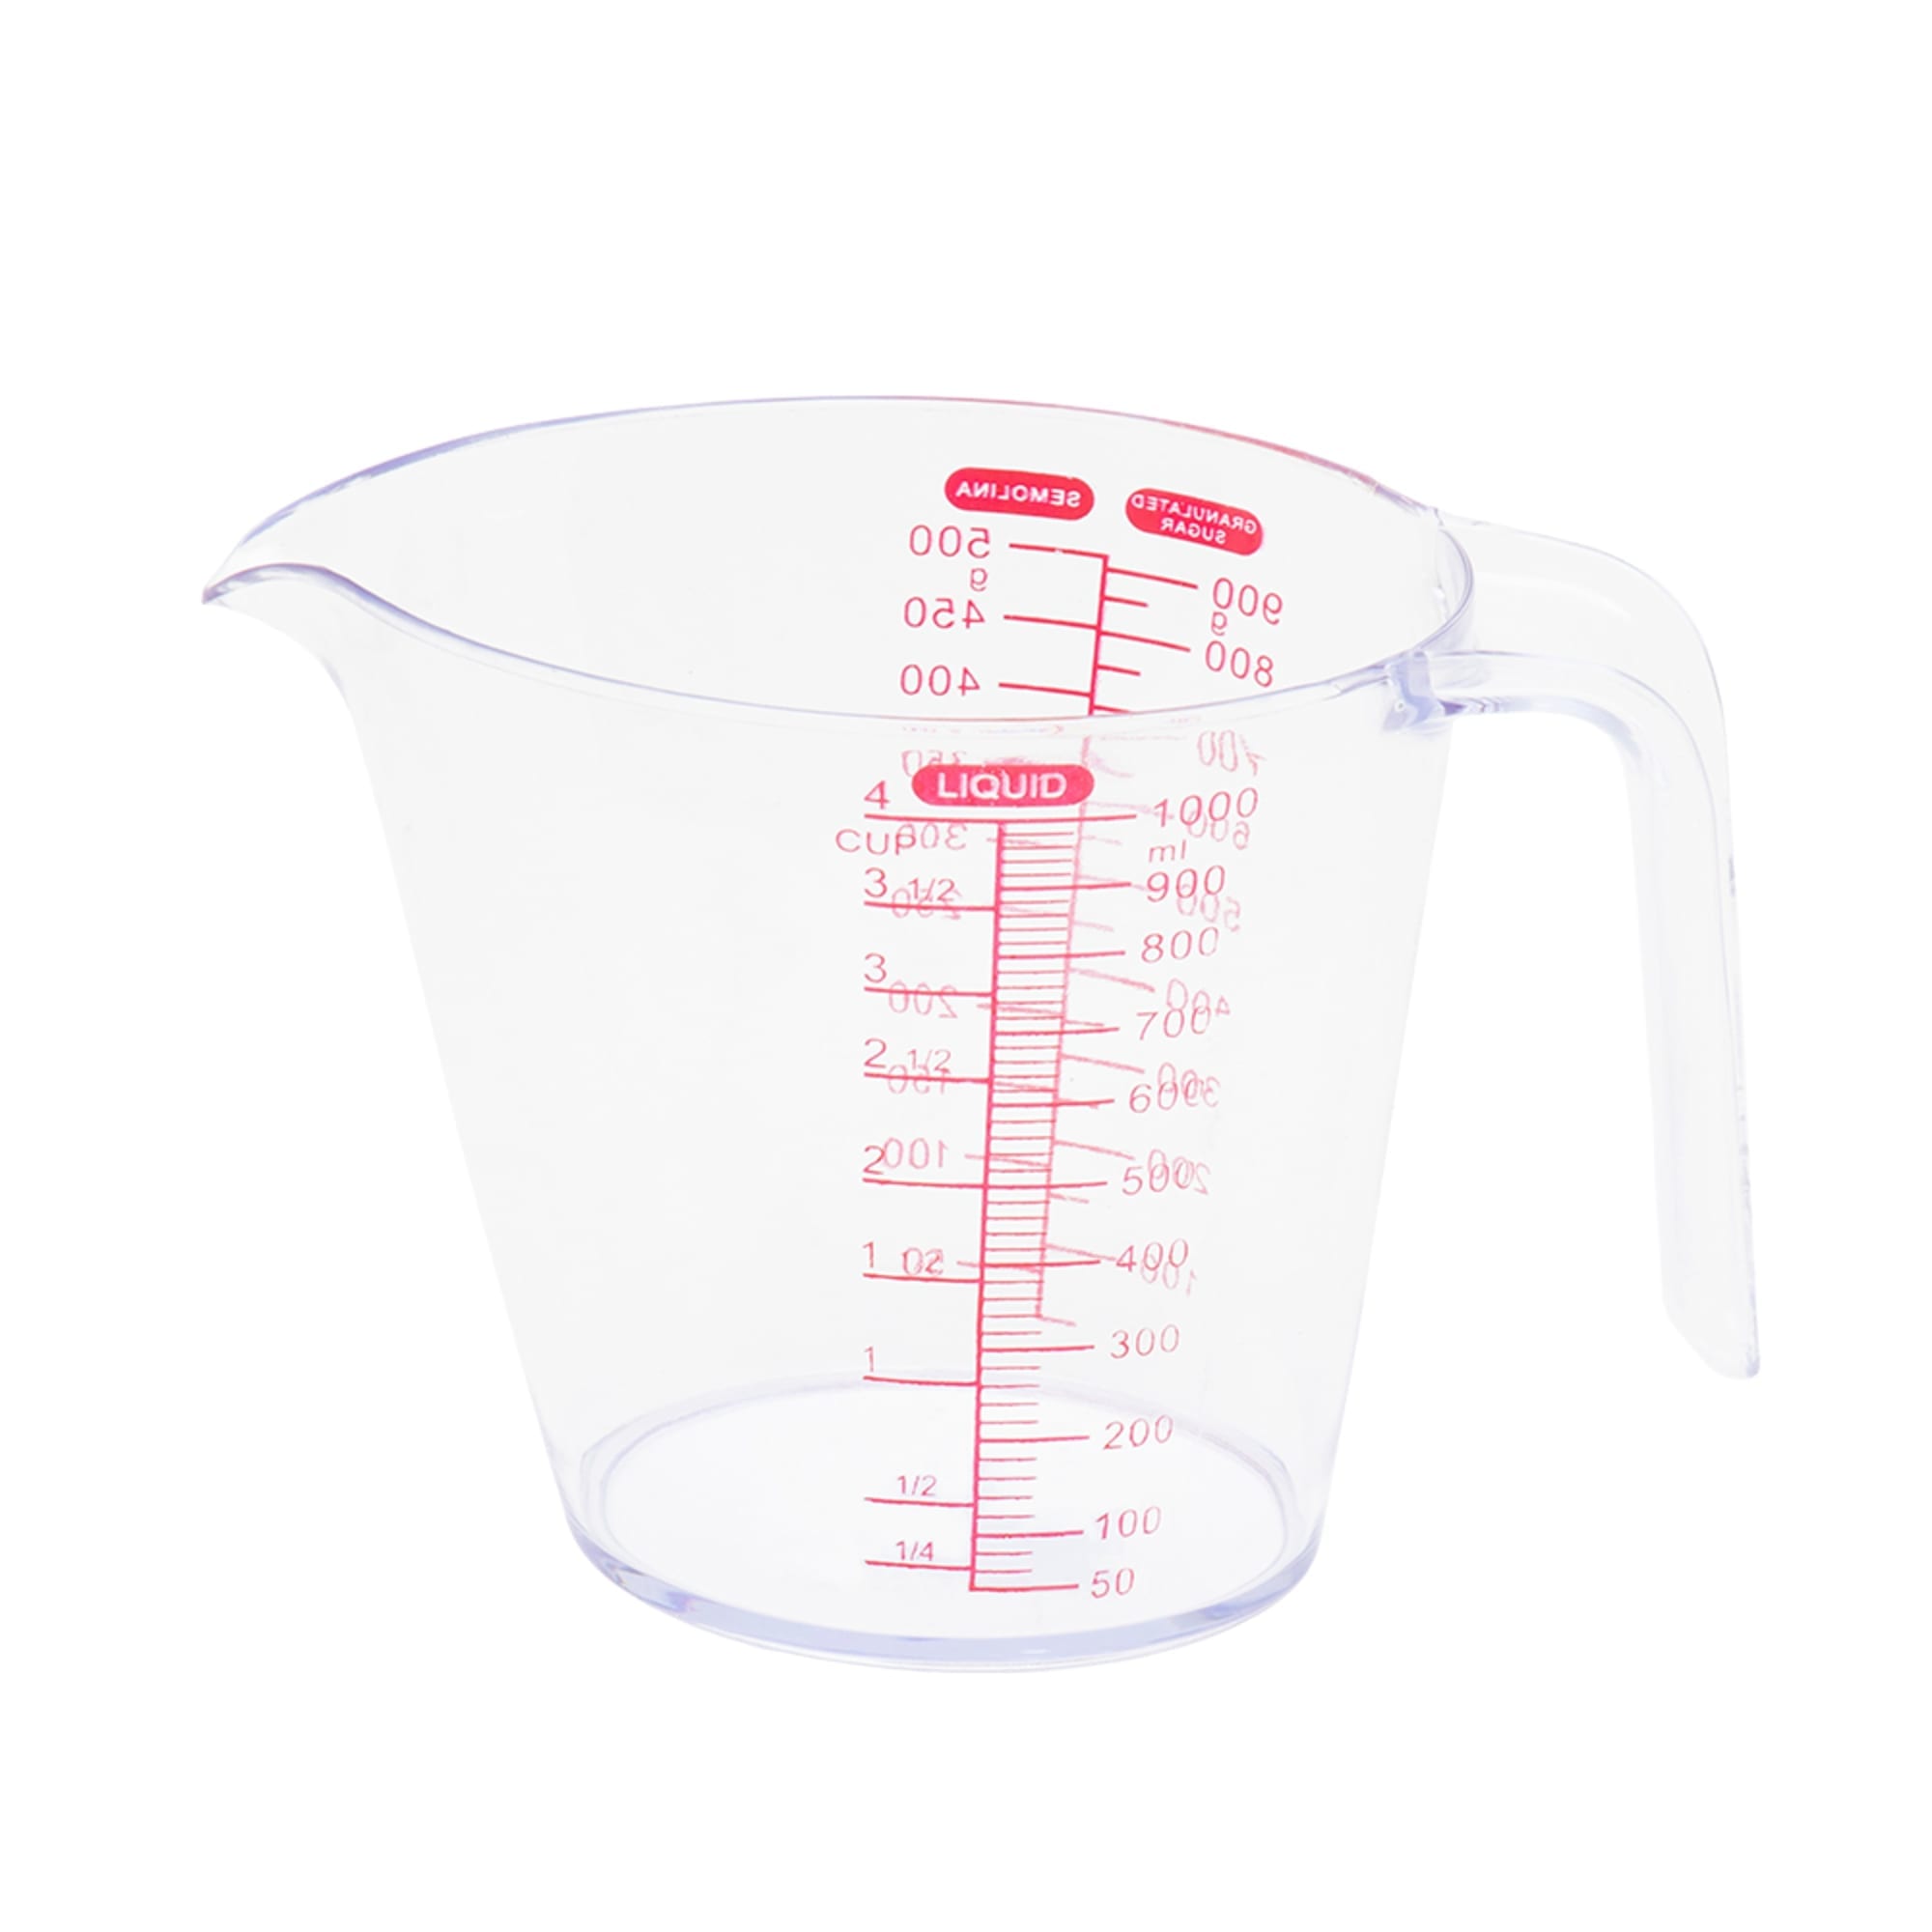 Home Basics 32 oz. Plastic Measuring Cup $2.00 EACH, CASE PACK OF 48